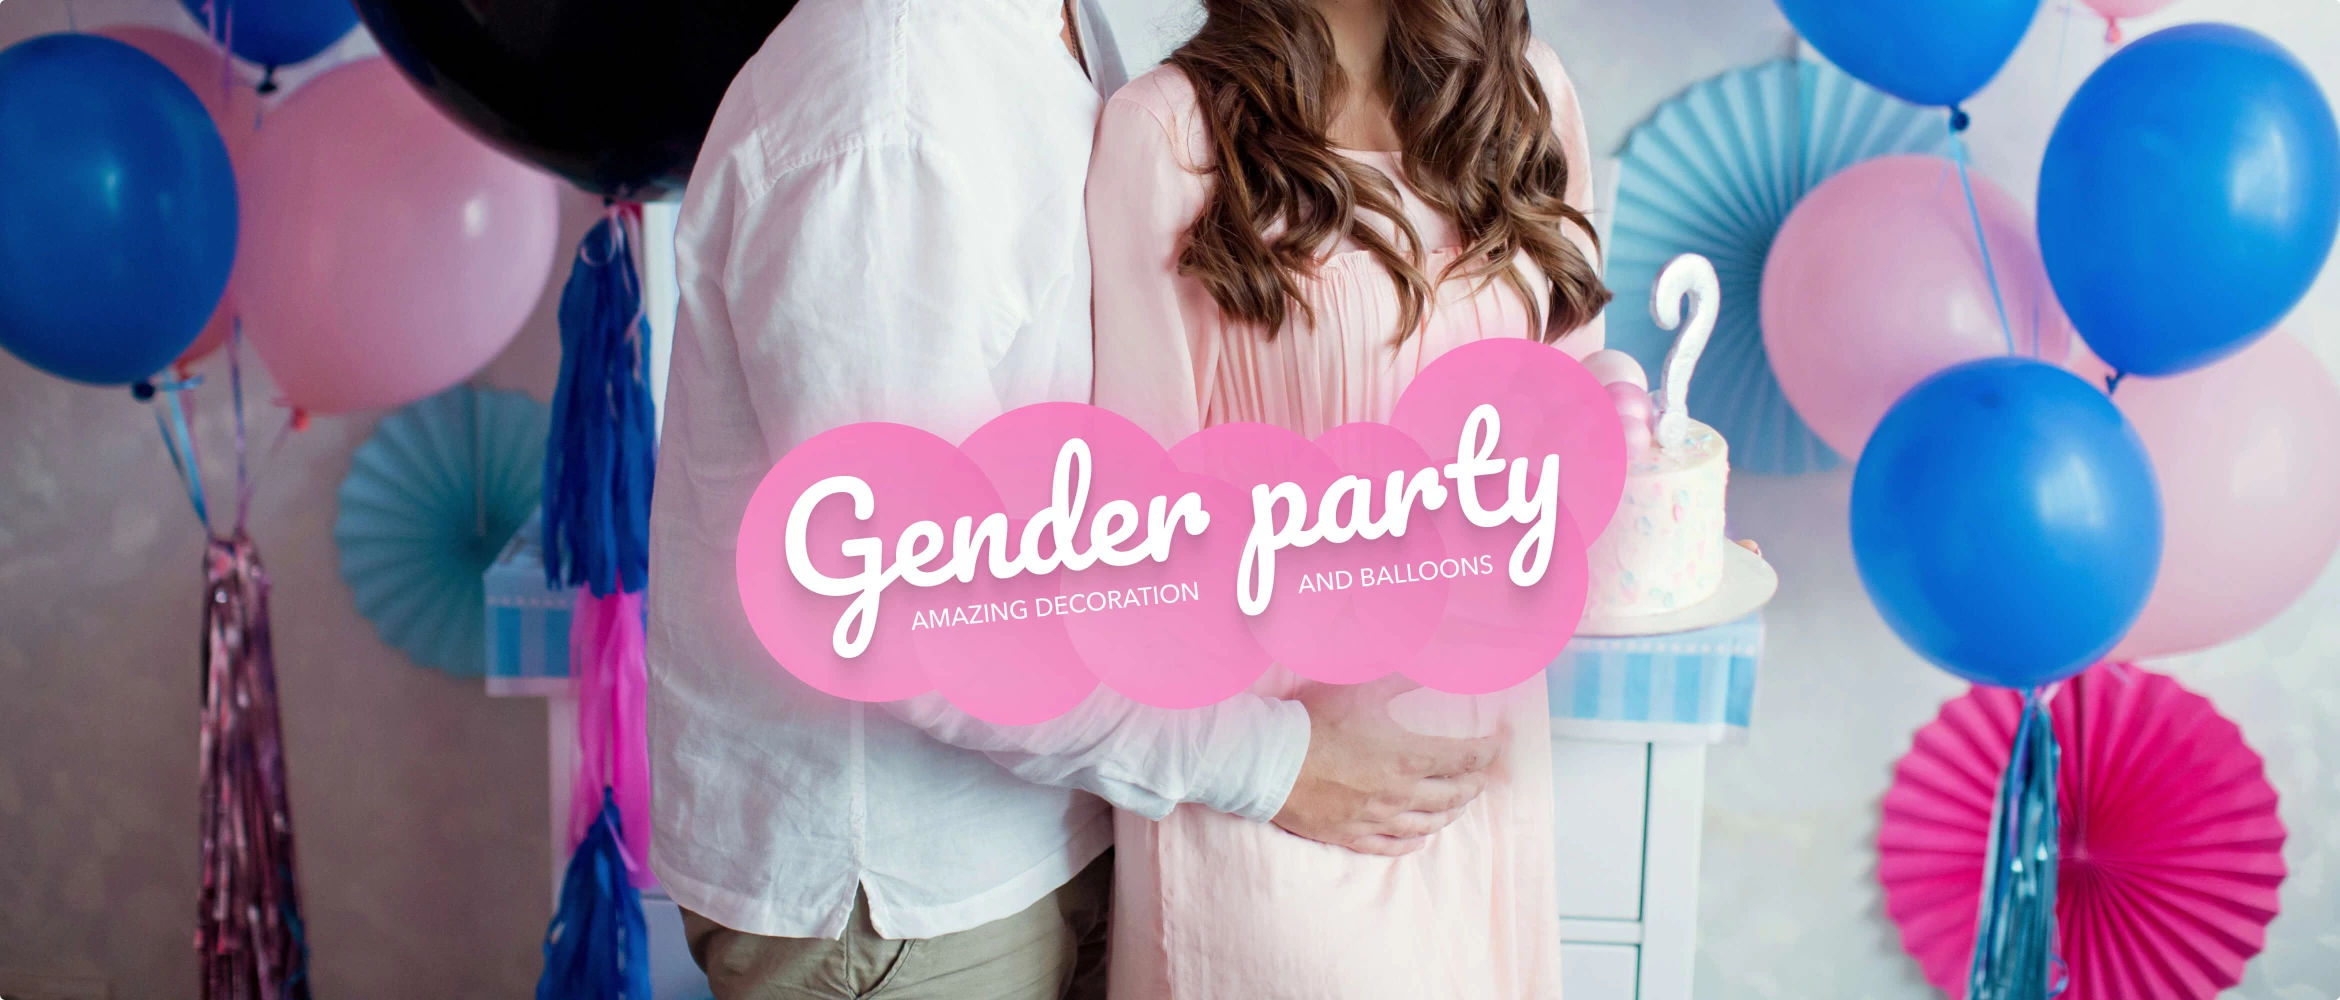 Gender party - amazing decorations